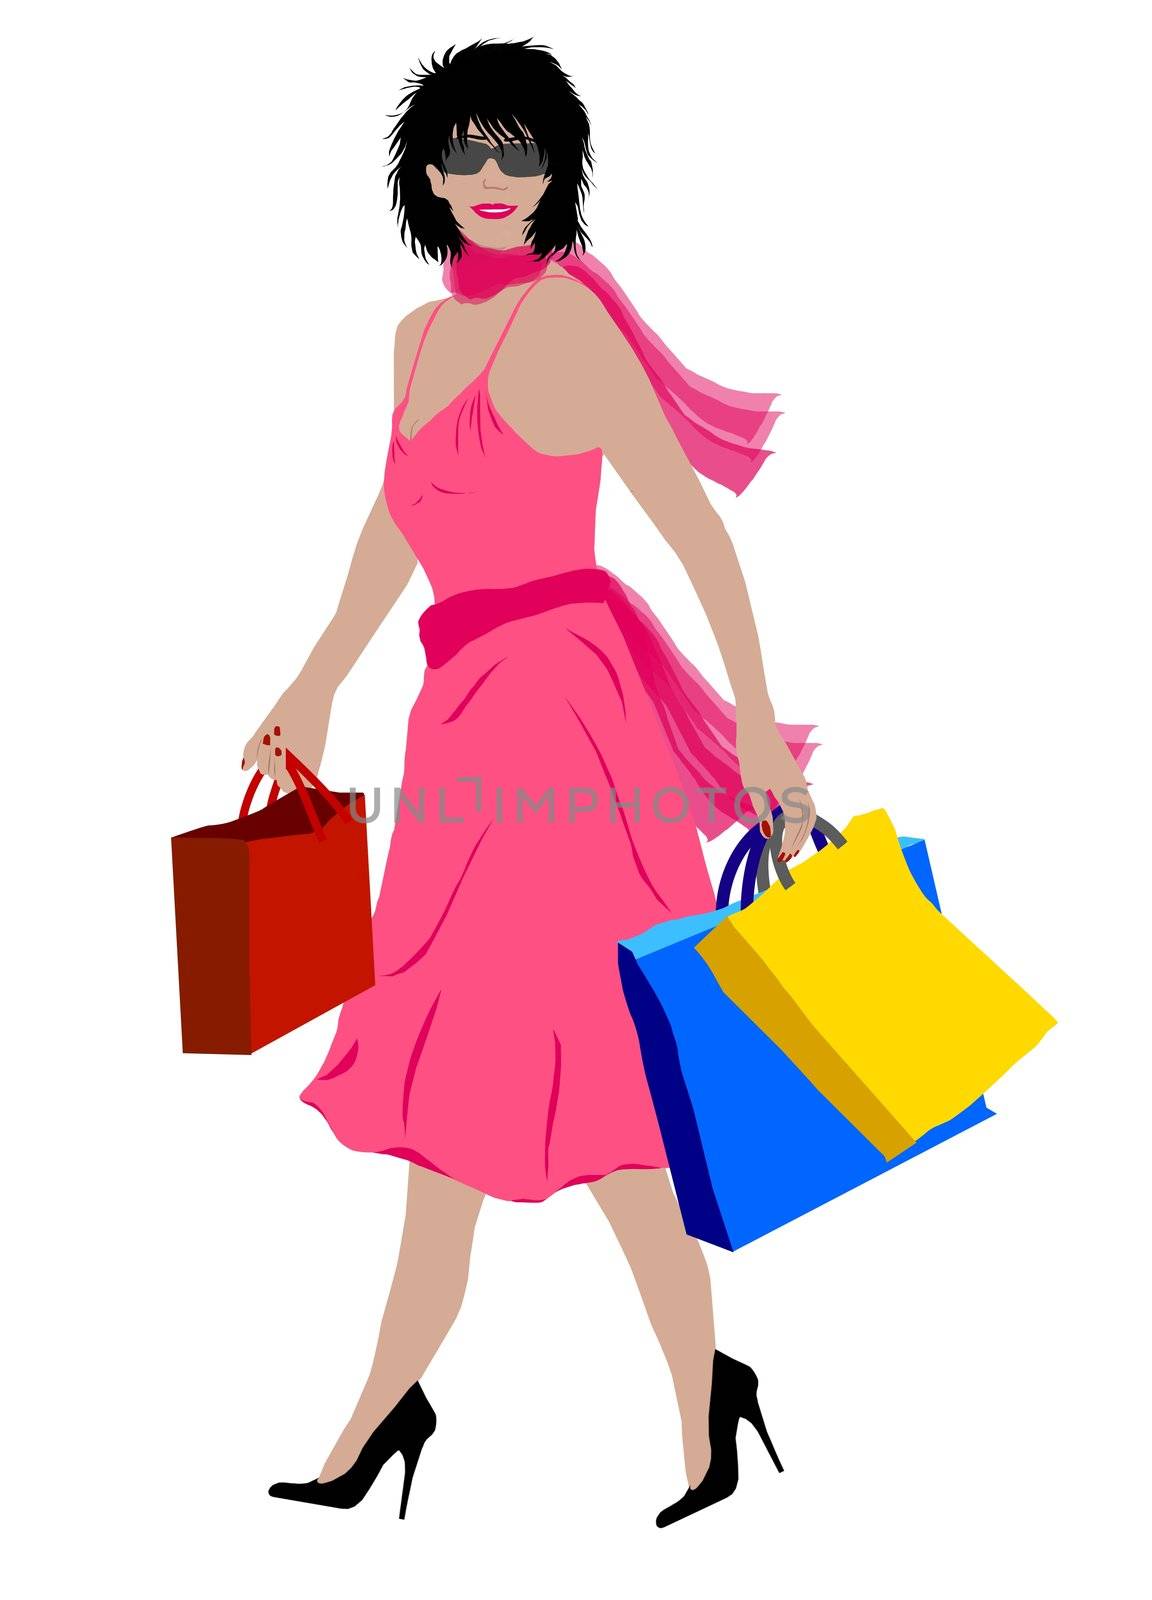 young woman with shopping bags by peromarketing